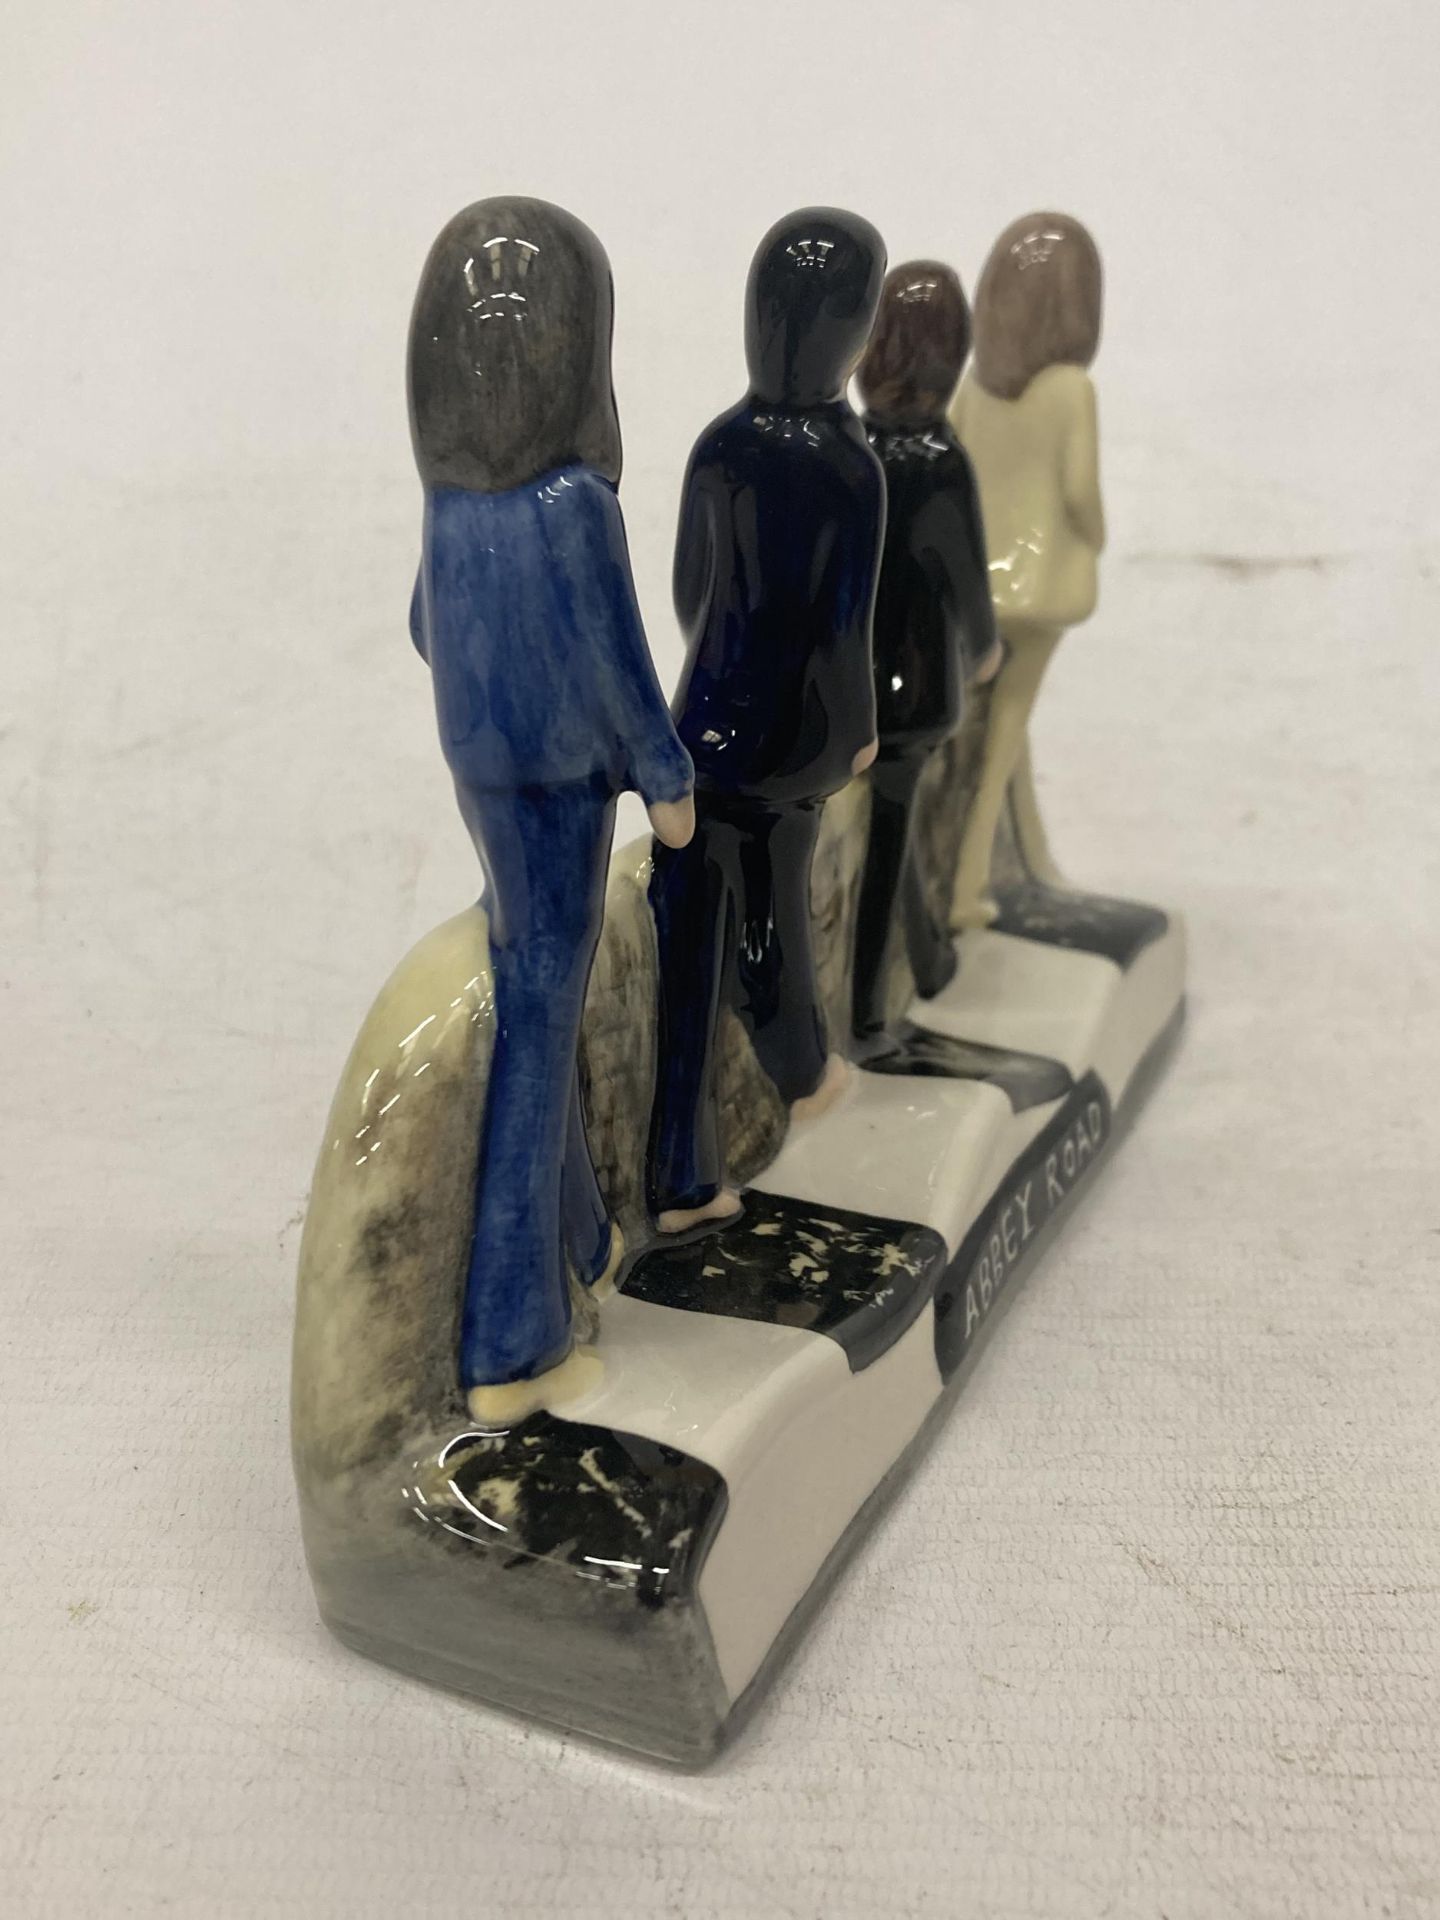 THE BEATLES ABBEY ROAD FIGURE - BAIRSTOW MANOR - Image 3 of 5